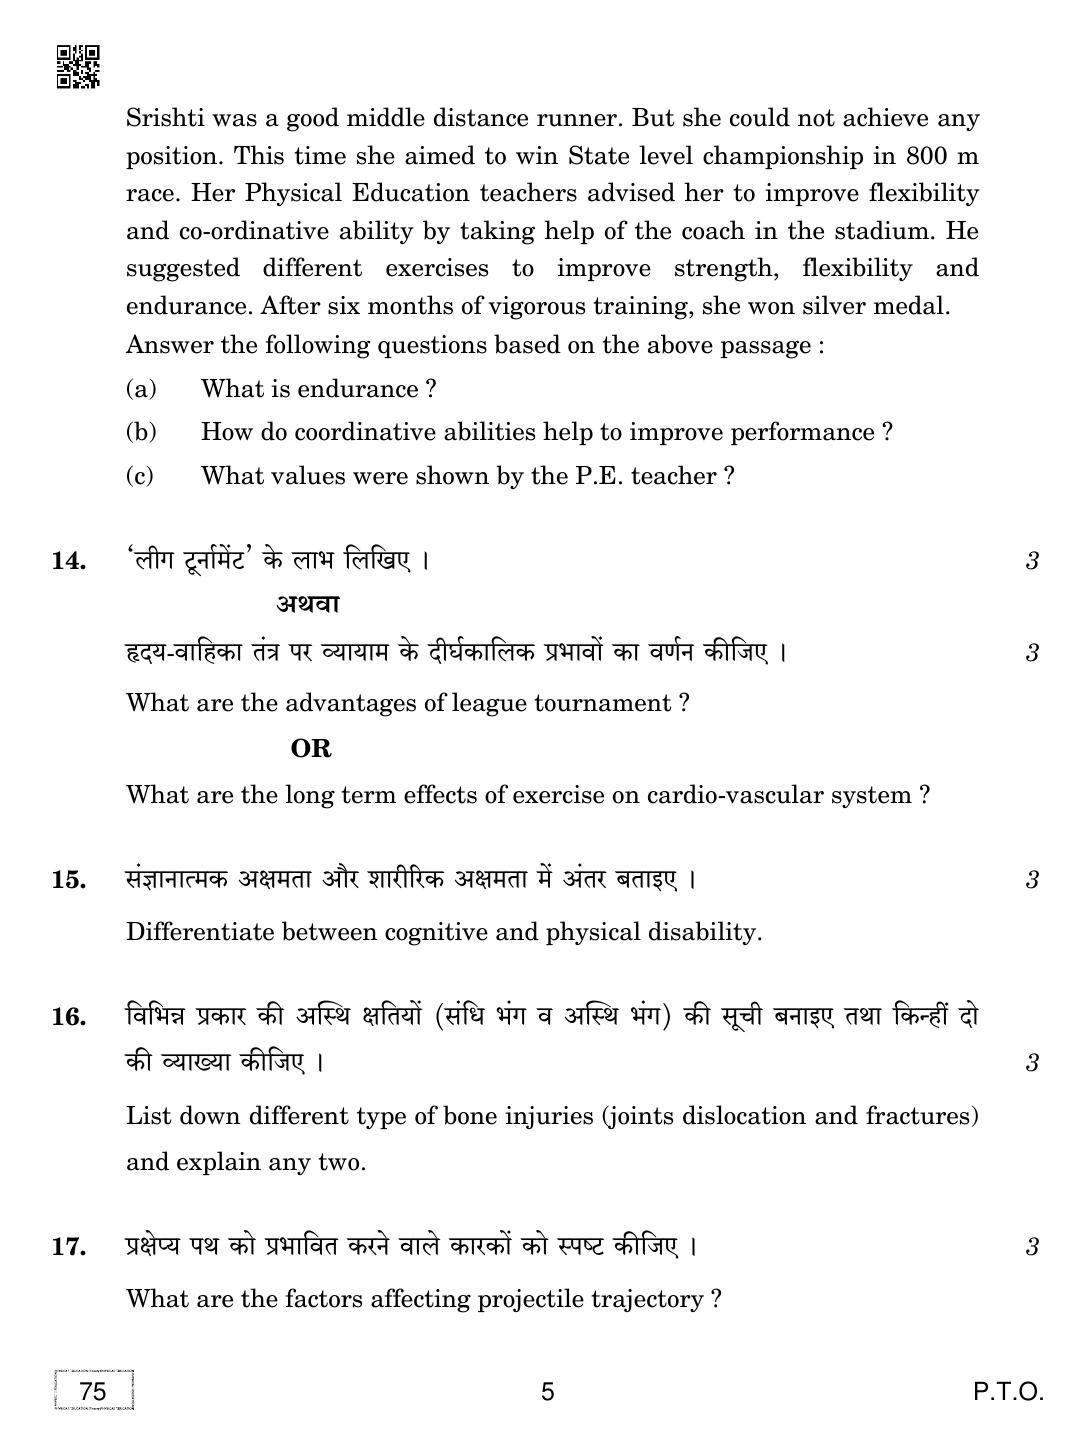 CBSE Class 12 75 PHYSICAL EDUCATION 2019 Compartment Question Paper - Page 5